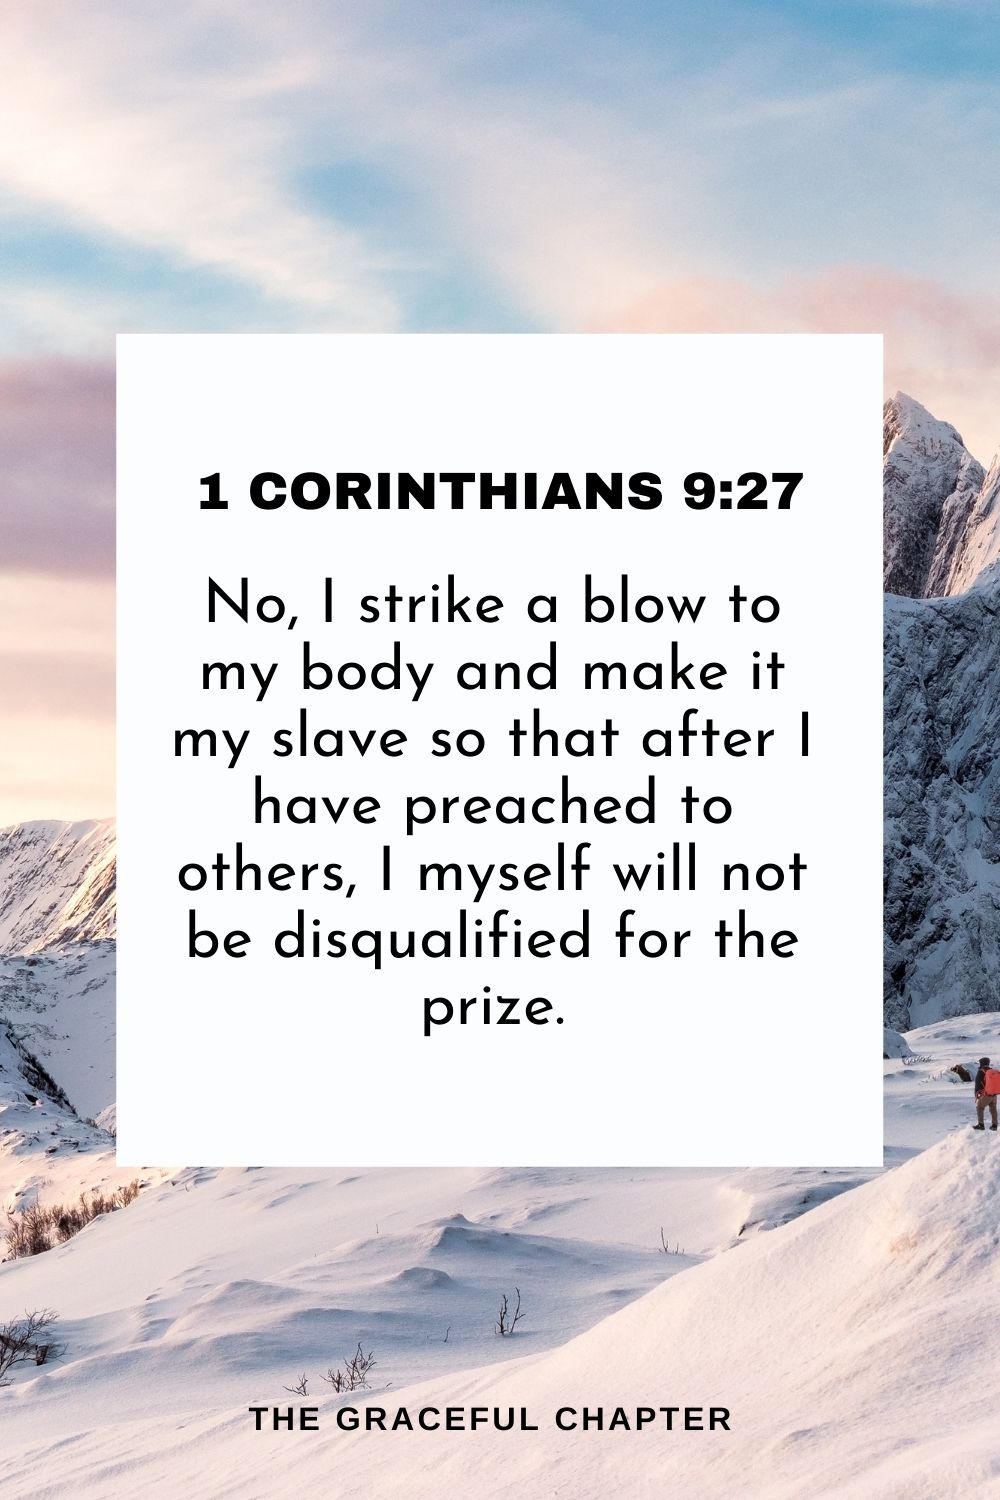 No, I strike a blow to my body and make it my slave so that after I have preached to others, I myself will not be disqualified for the prize. 1 Corinthians 9:27